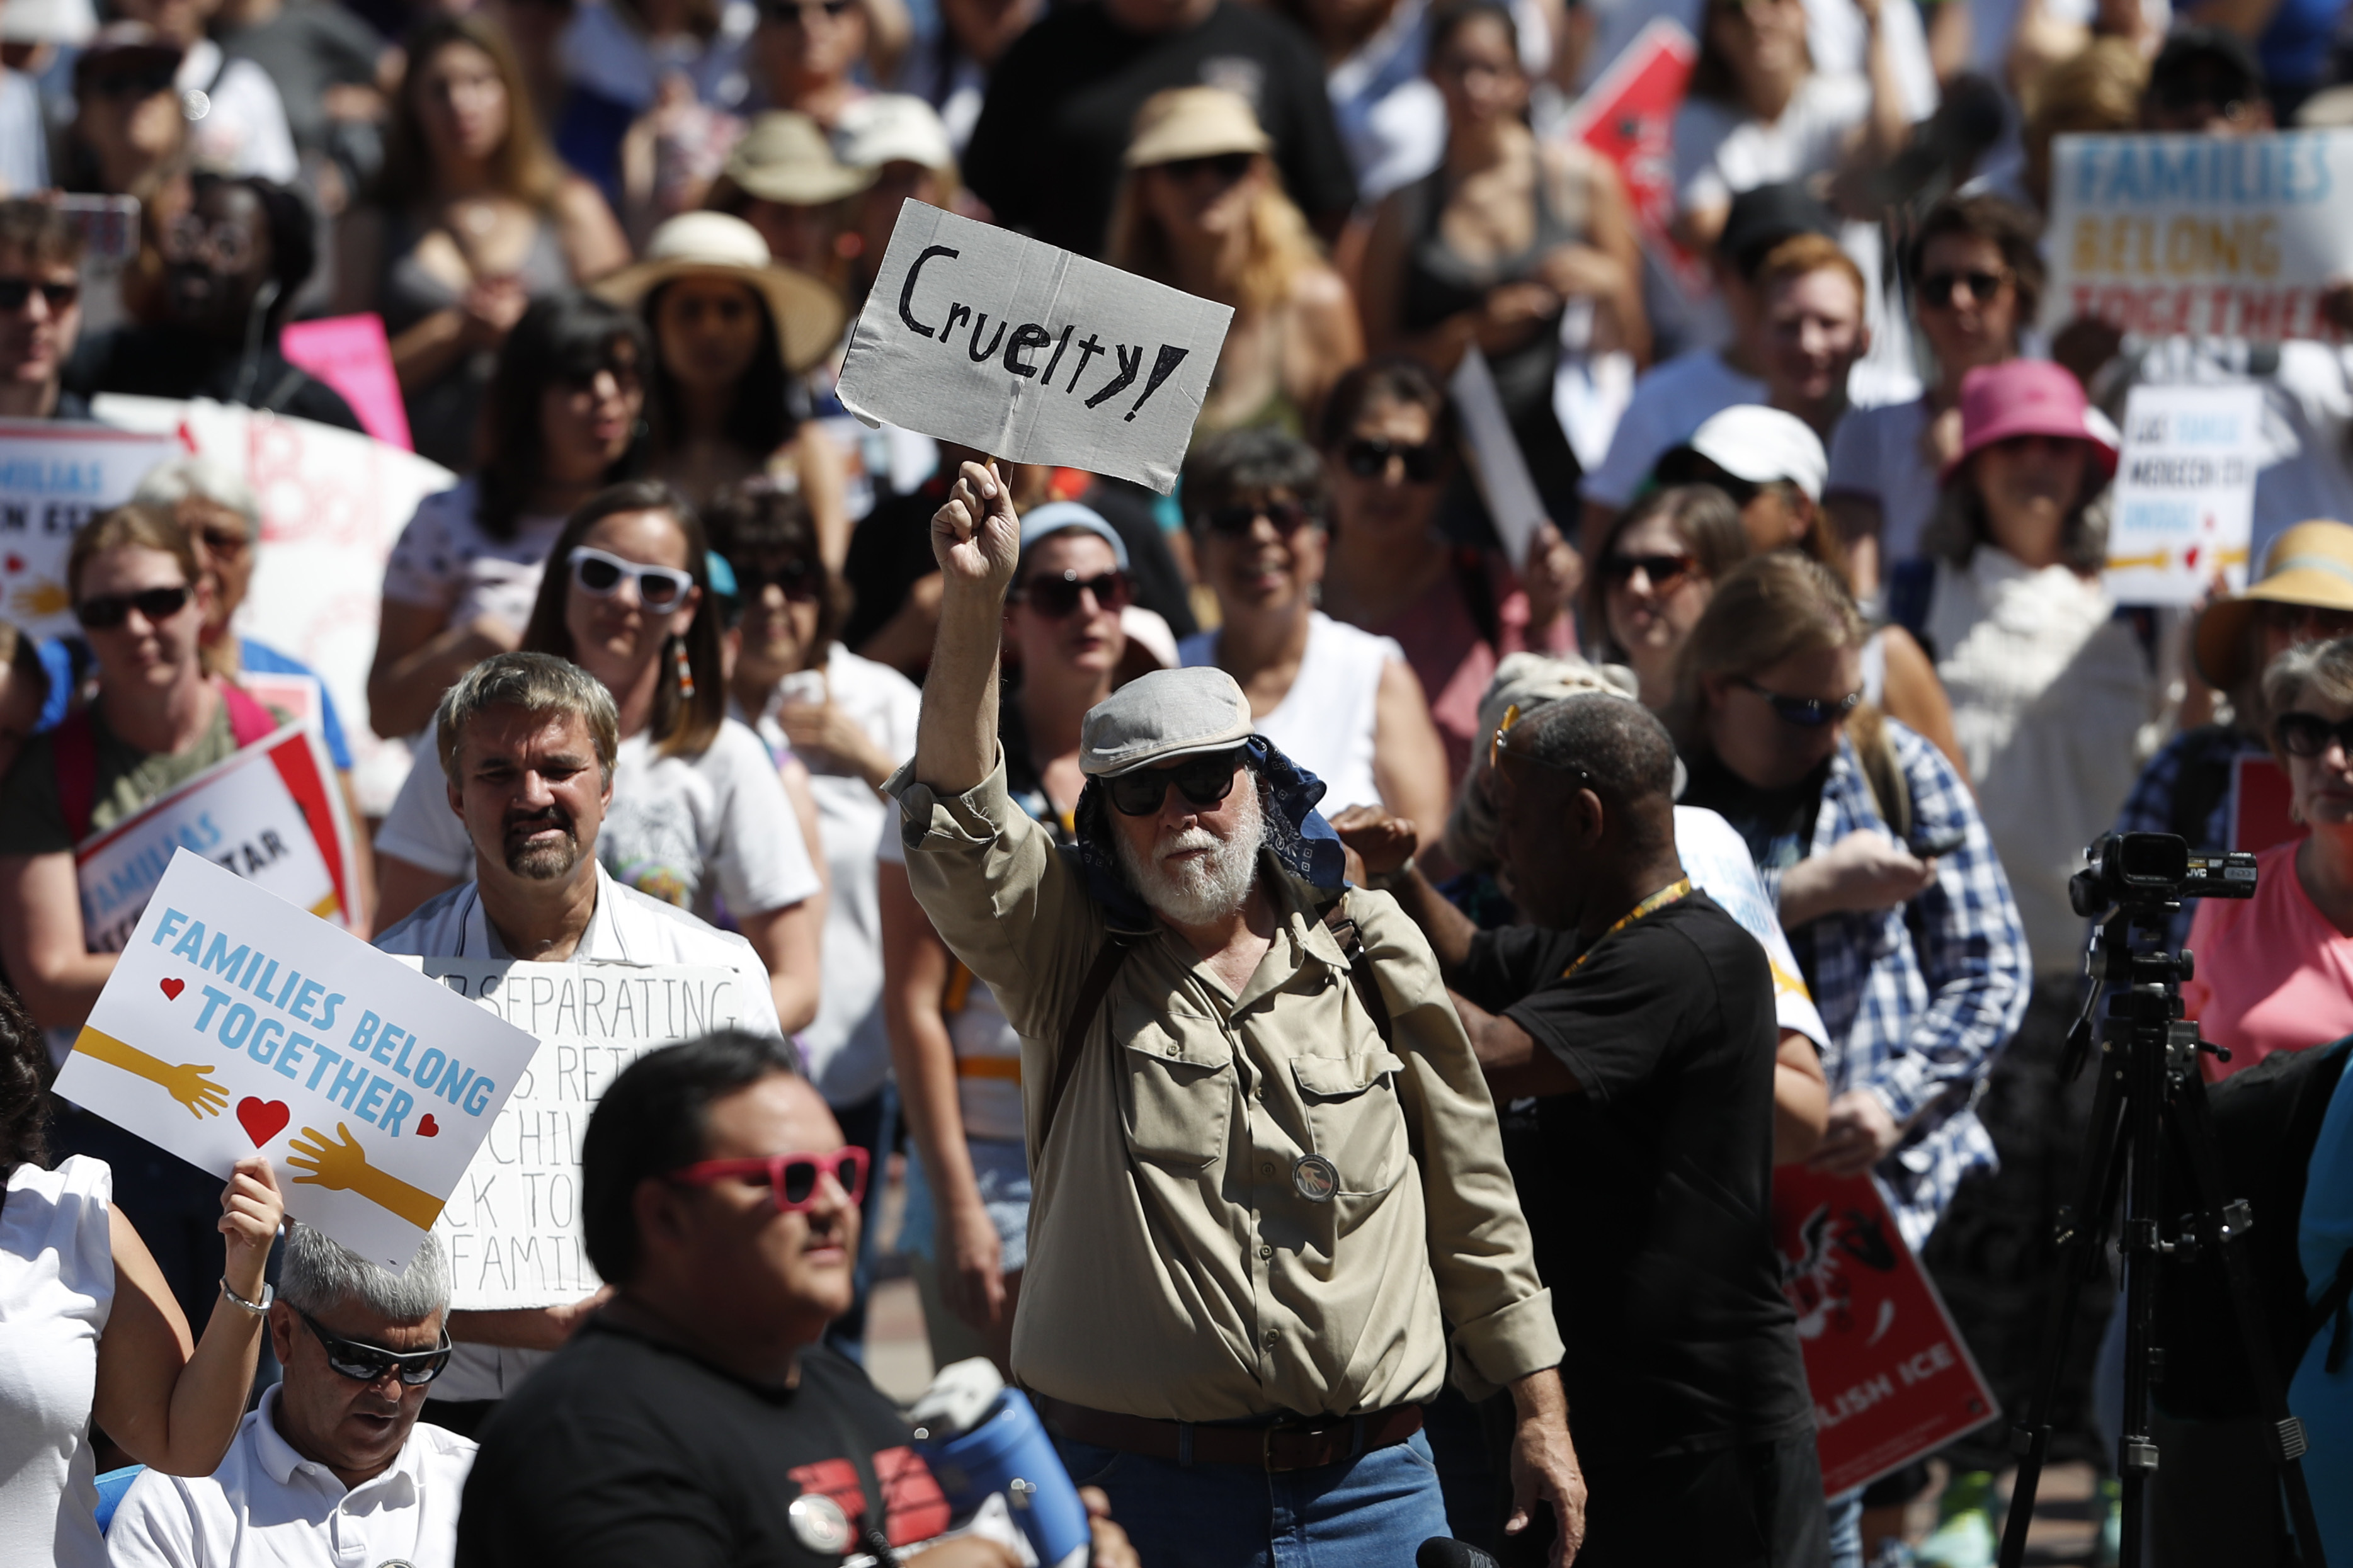 A protester holds up a one-word placard--Cruelty--during an immigration rally and protest in Civic Center Park Saturday, June 30, 2018, in downtown Denver. The protest was one of hundreds staged nationwide that has brought liberal activists, parents and first-time protesters--motivated by accounts of children separated from their parents at the US-Mexico border--to press President Donald Trump to reunite families quickly. (AP Photo/David Zalubowski)